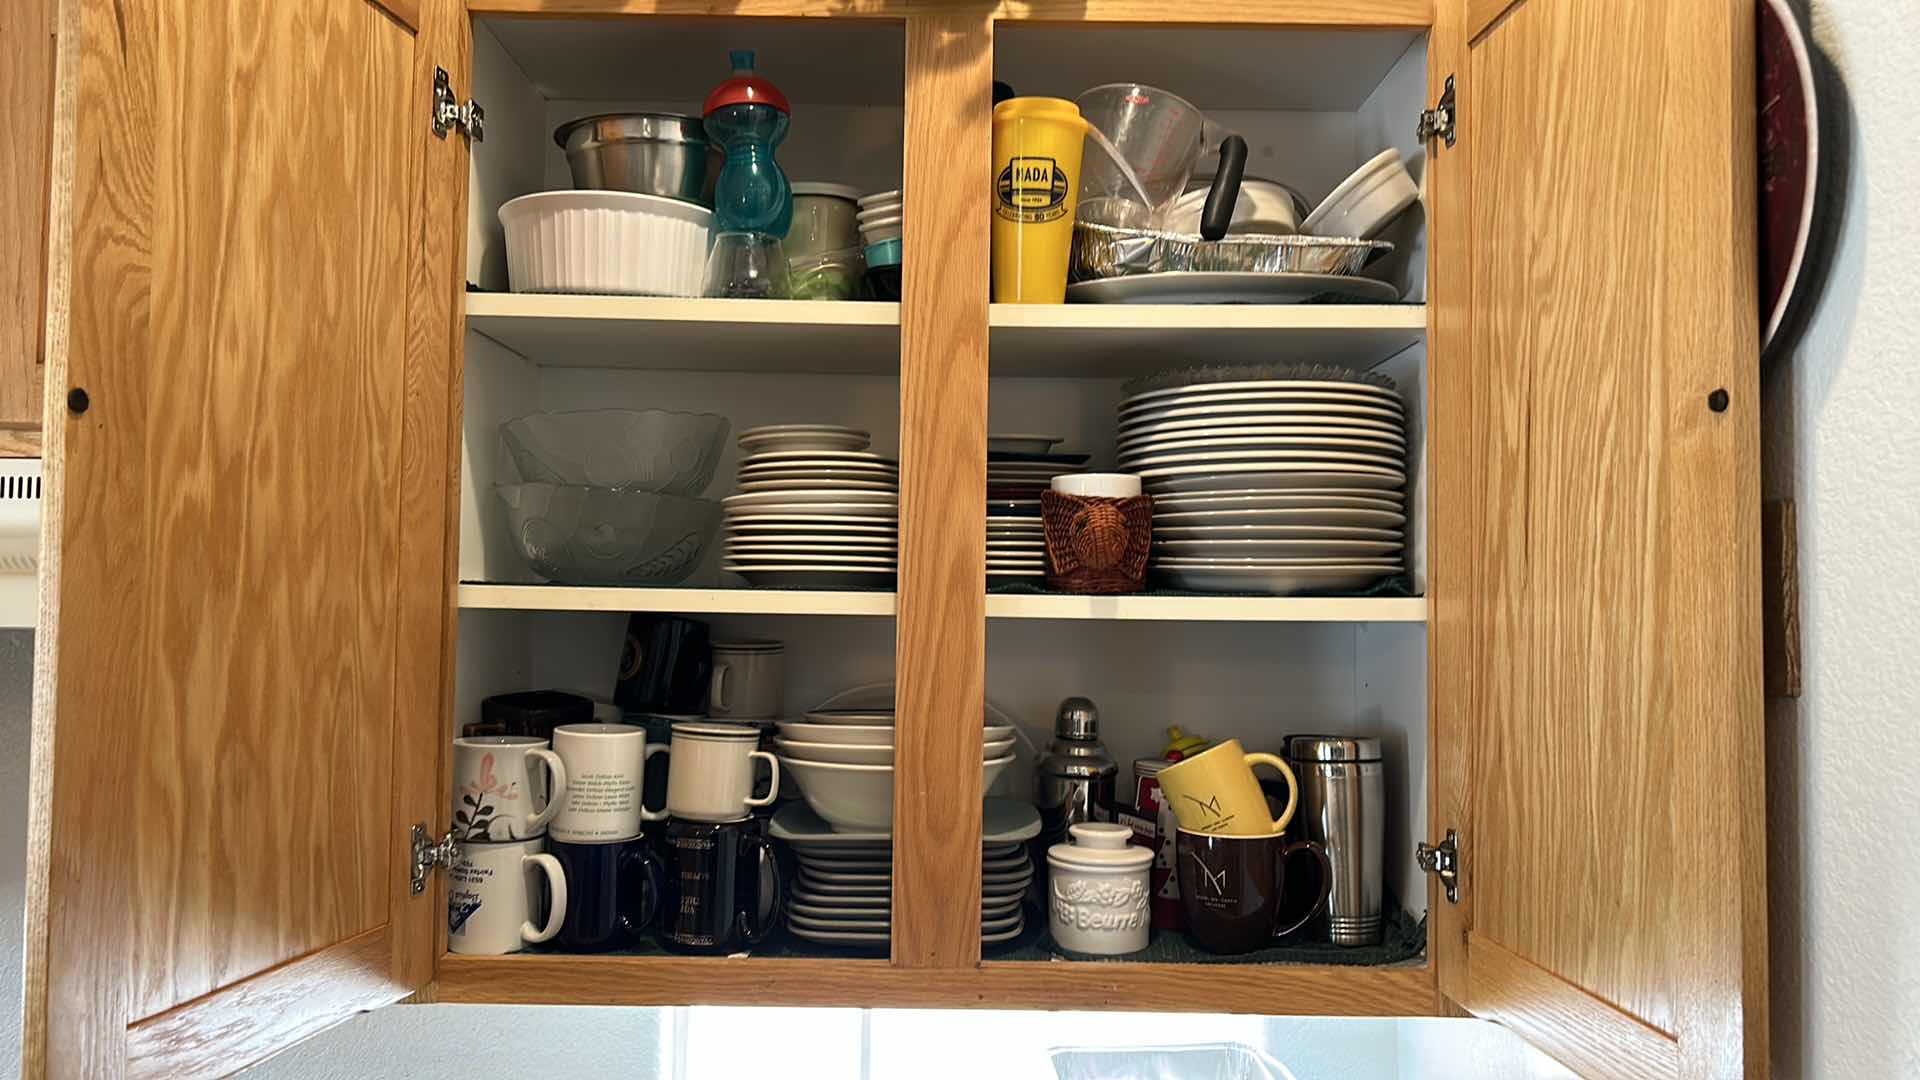 Photo 6 of CONTENTS OF KITCHEN CABINET- PLATES, COFFEE CUPS AND MORE